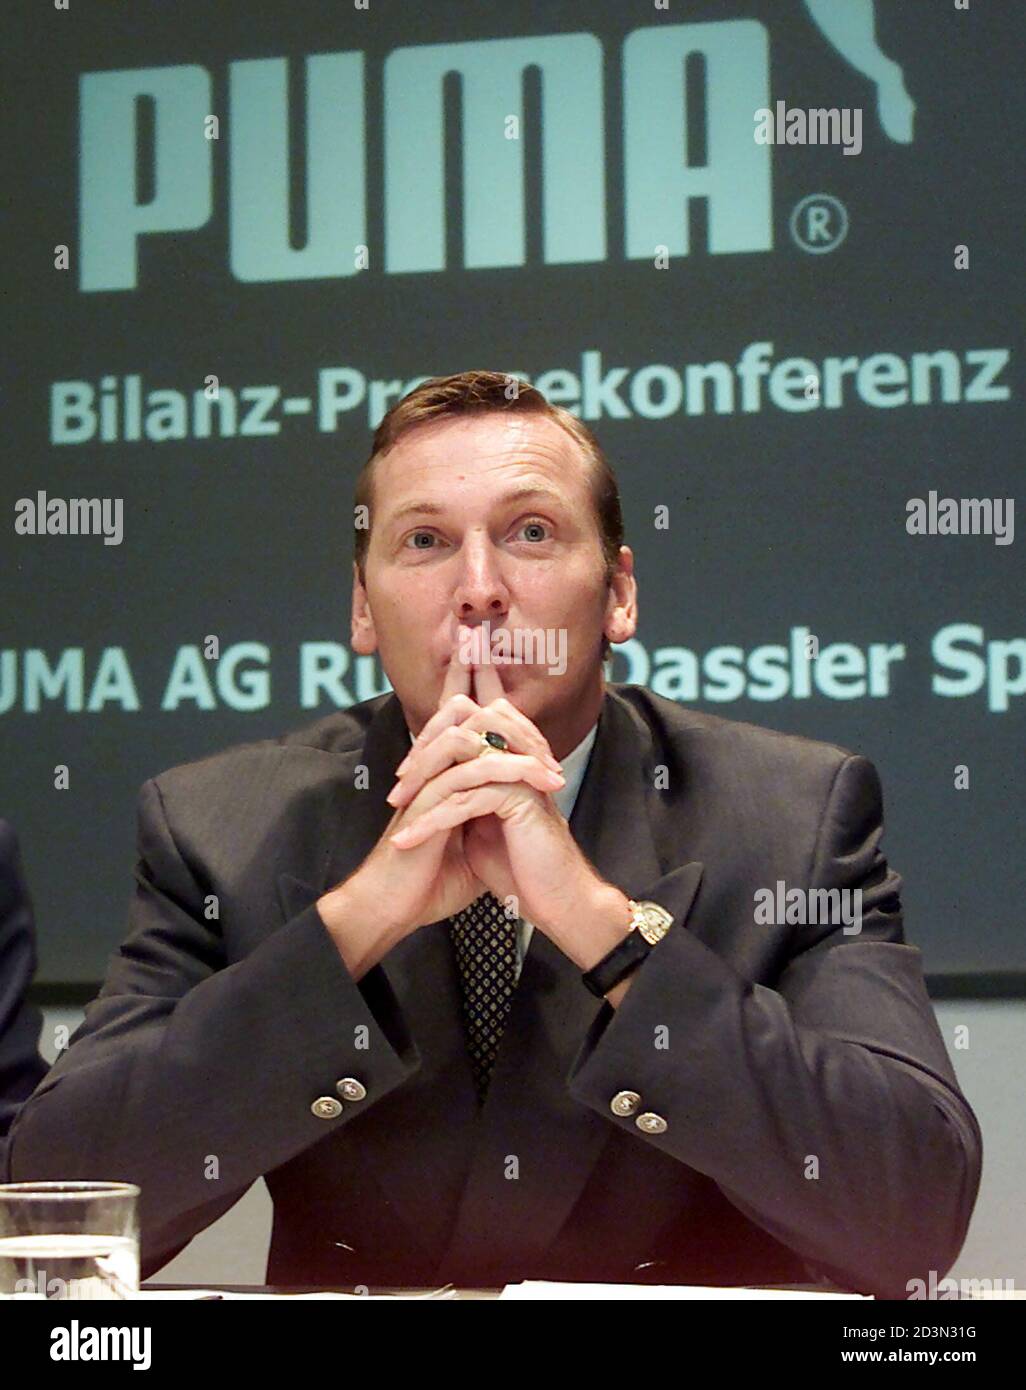 JOCHEN ZEITZ, CEO OF GERMAN SPORTSWEAR COMPANY PUMA AG, PRIOR TO THE ANNUAL  NEWS CONFERENCE IN HERZOGENAURACH. Jochen Zeitz, CEO of Germany's  second-largest sportswear group Puma AG, pauses prior to the annual